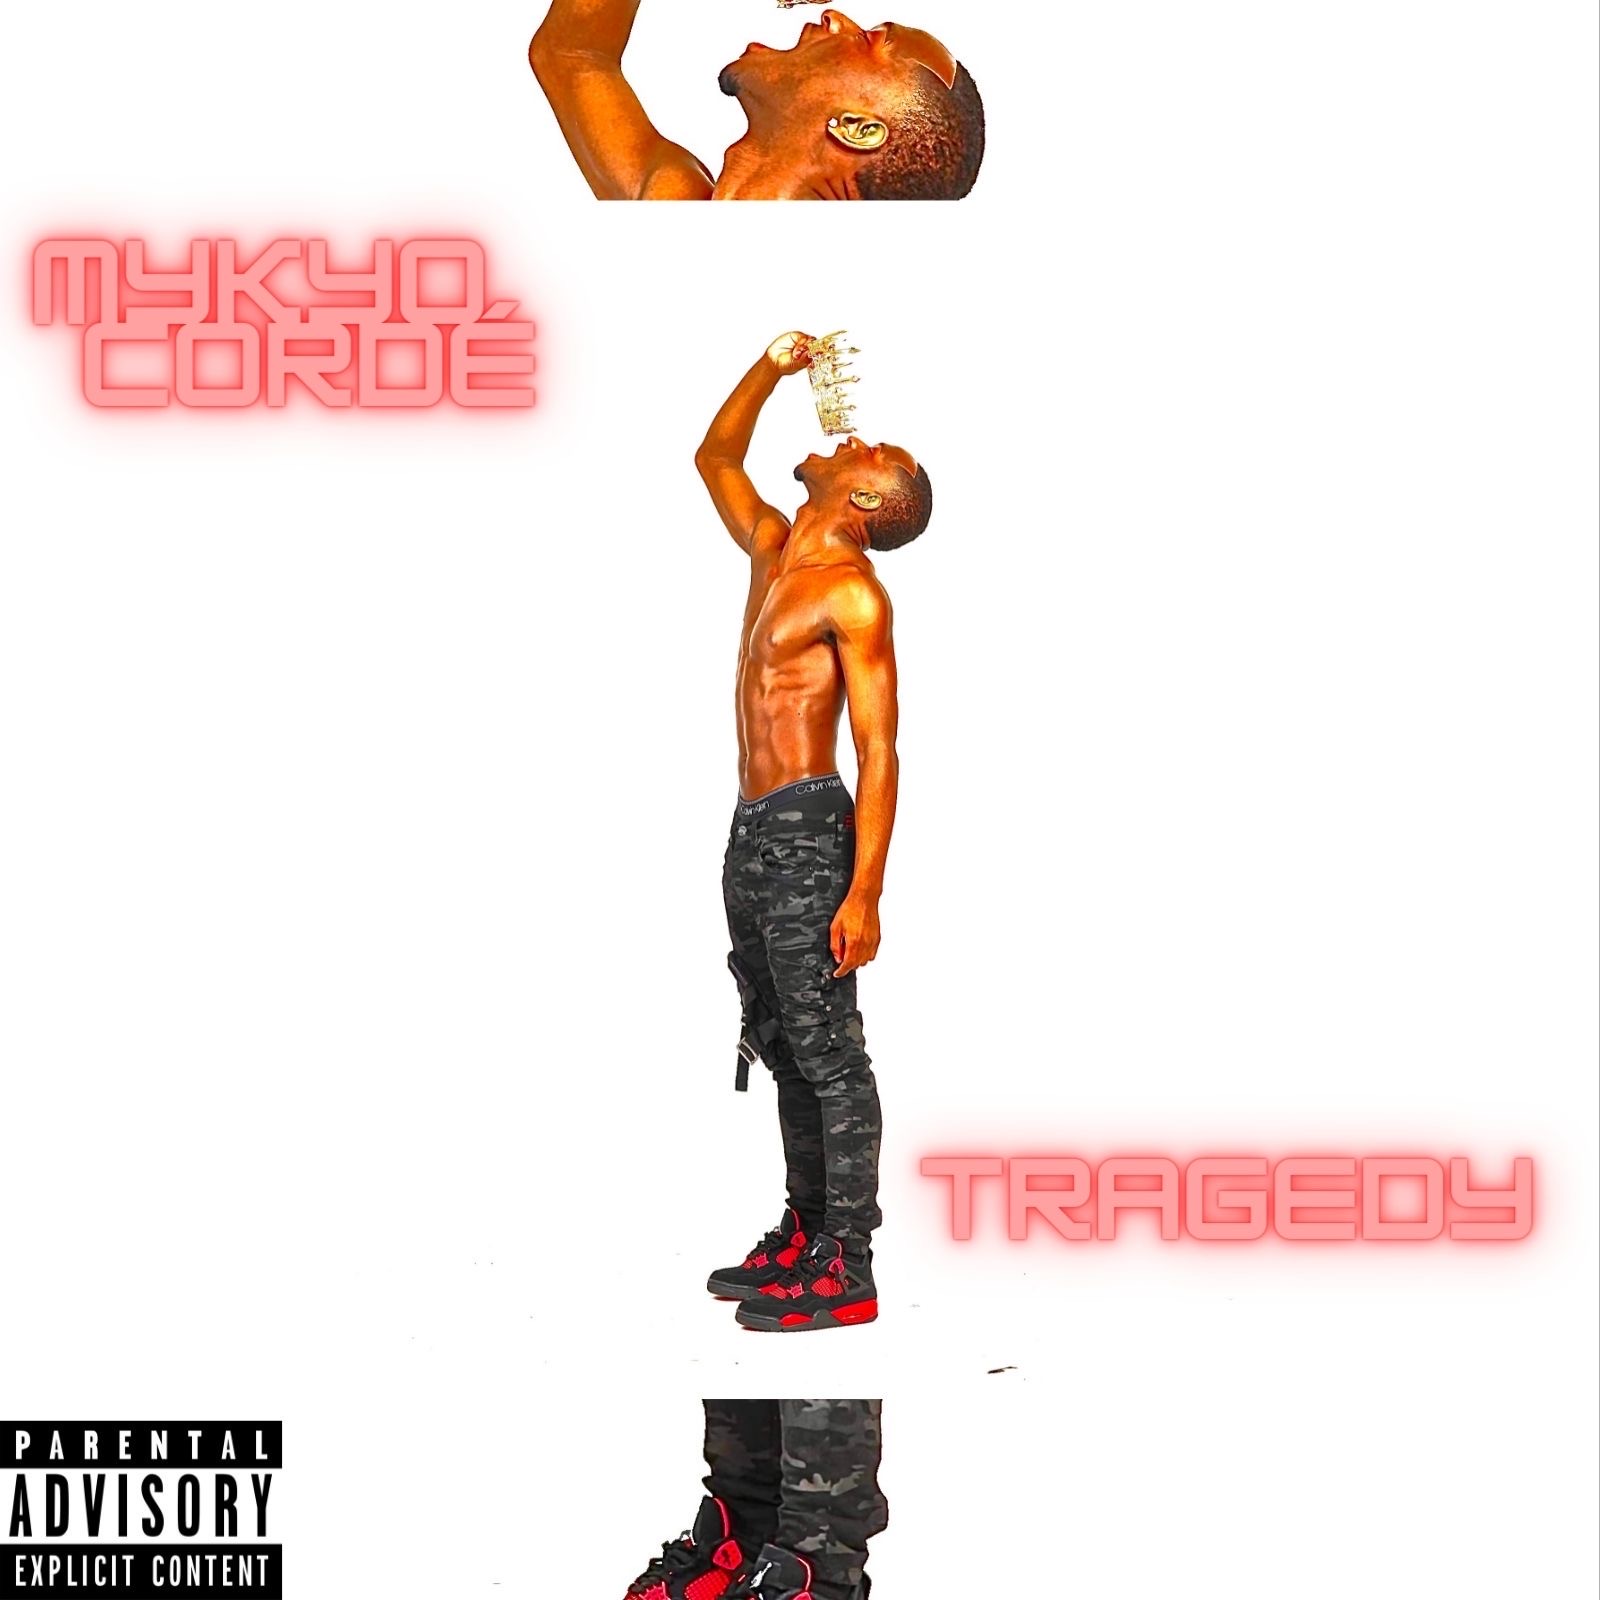 Mykyo Corde - Tragedy Cover Art